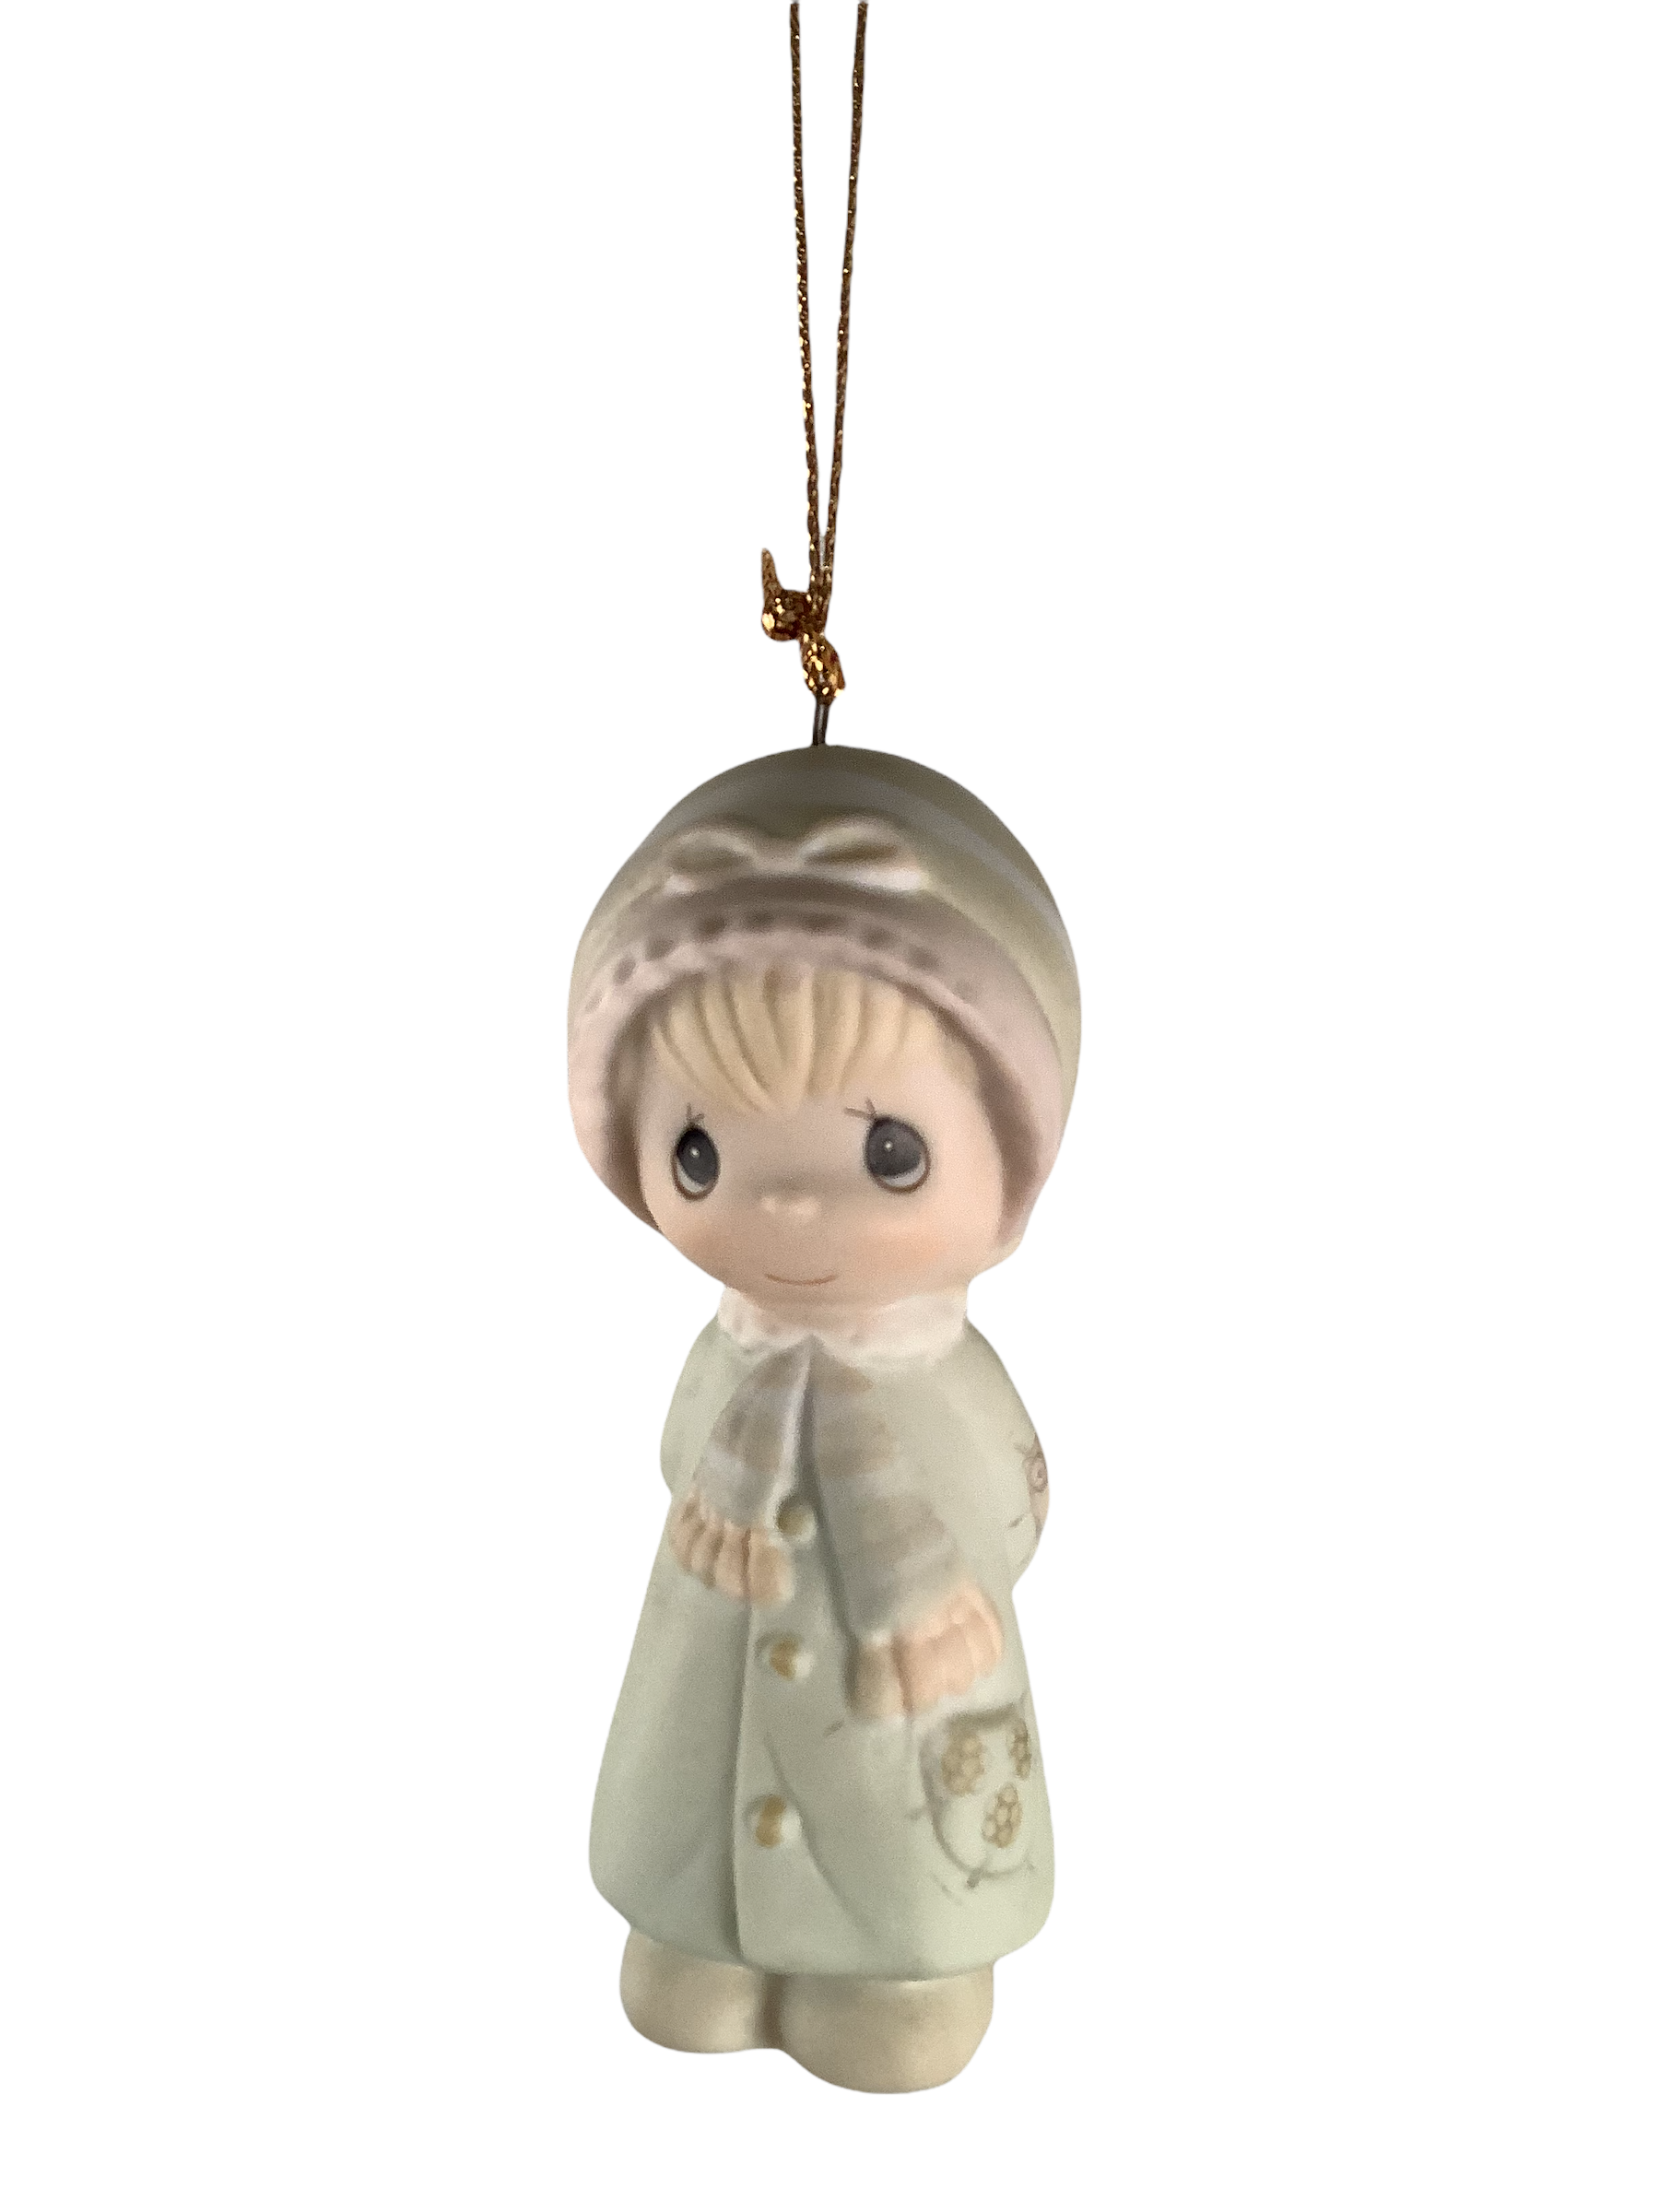 May God Bless You With A Perfect Holiday Season - Precious Moment Ornament